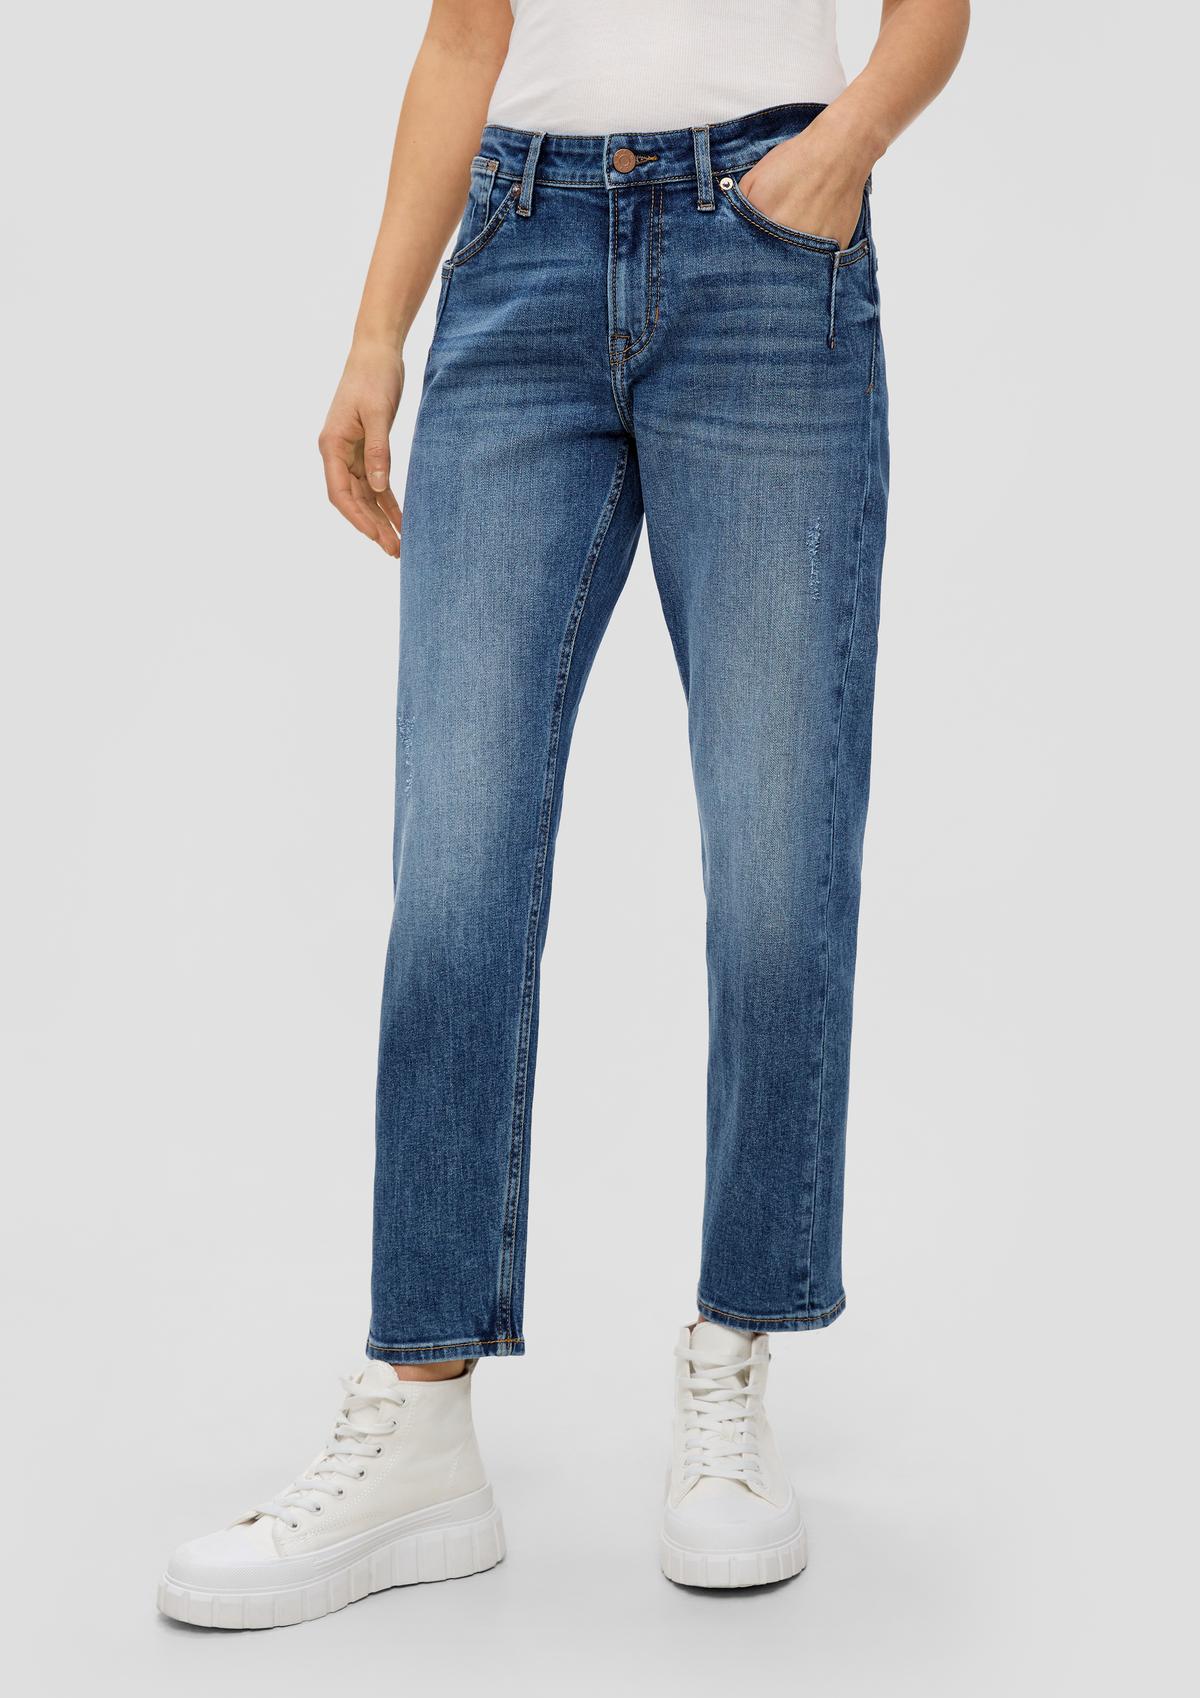 s.Oliver Franciz ankle-length jeans / relaxed fit / low rise / tapered leg